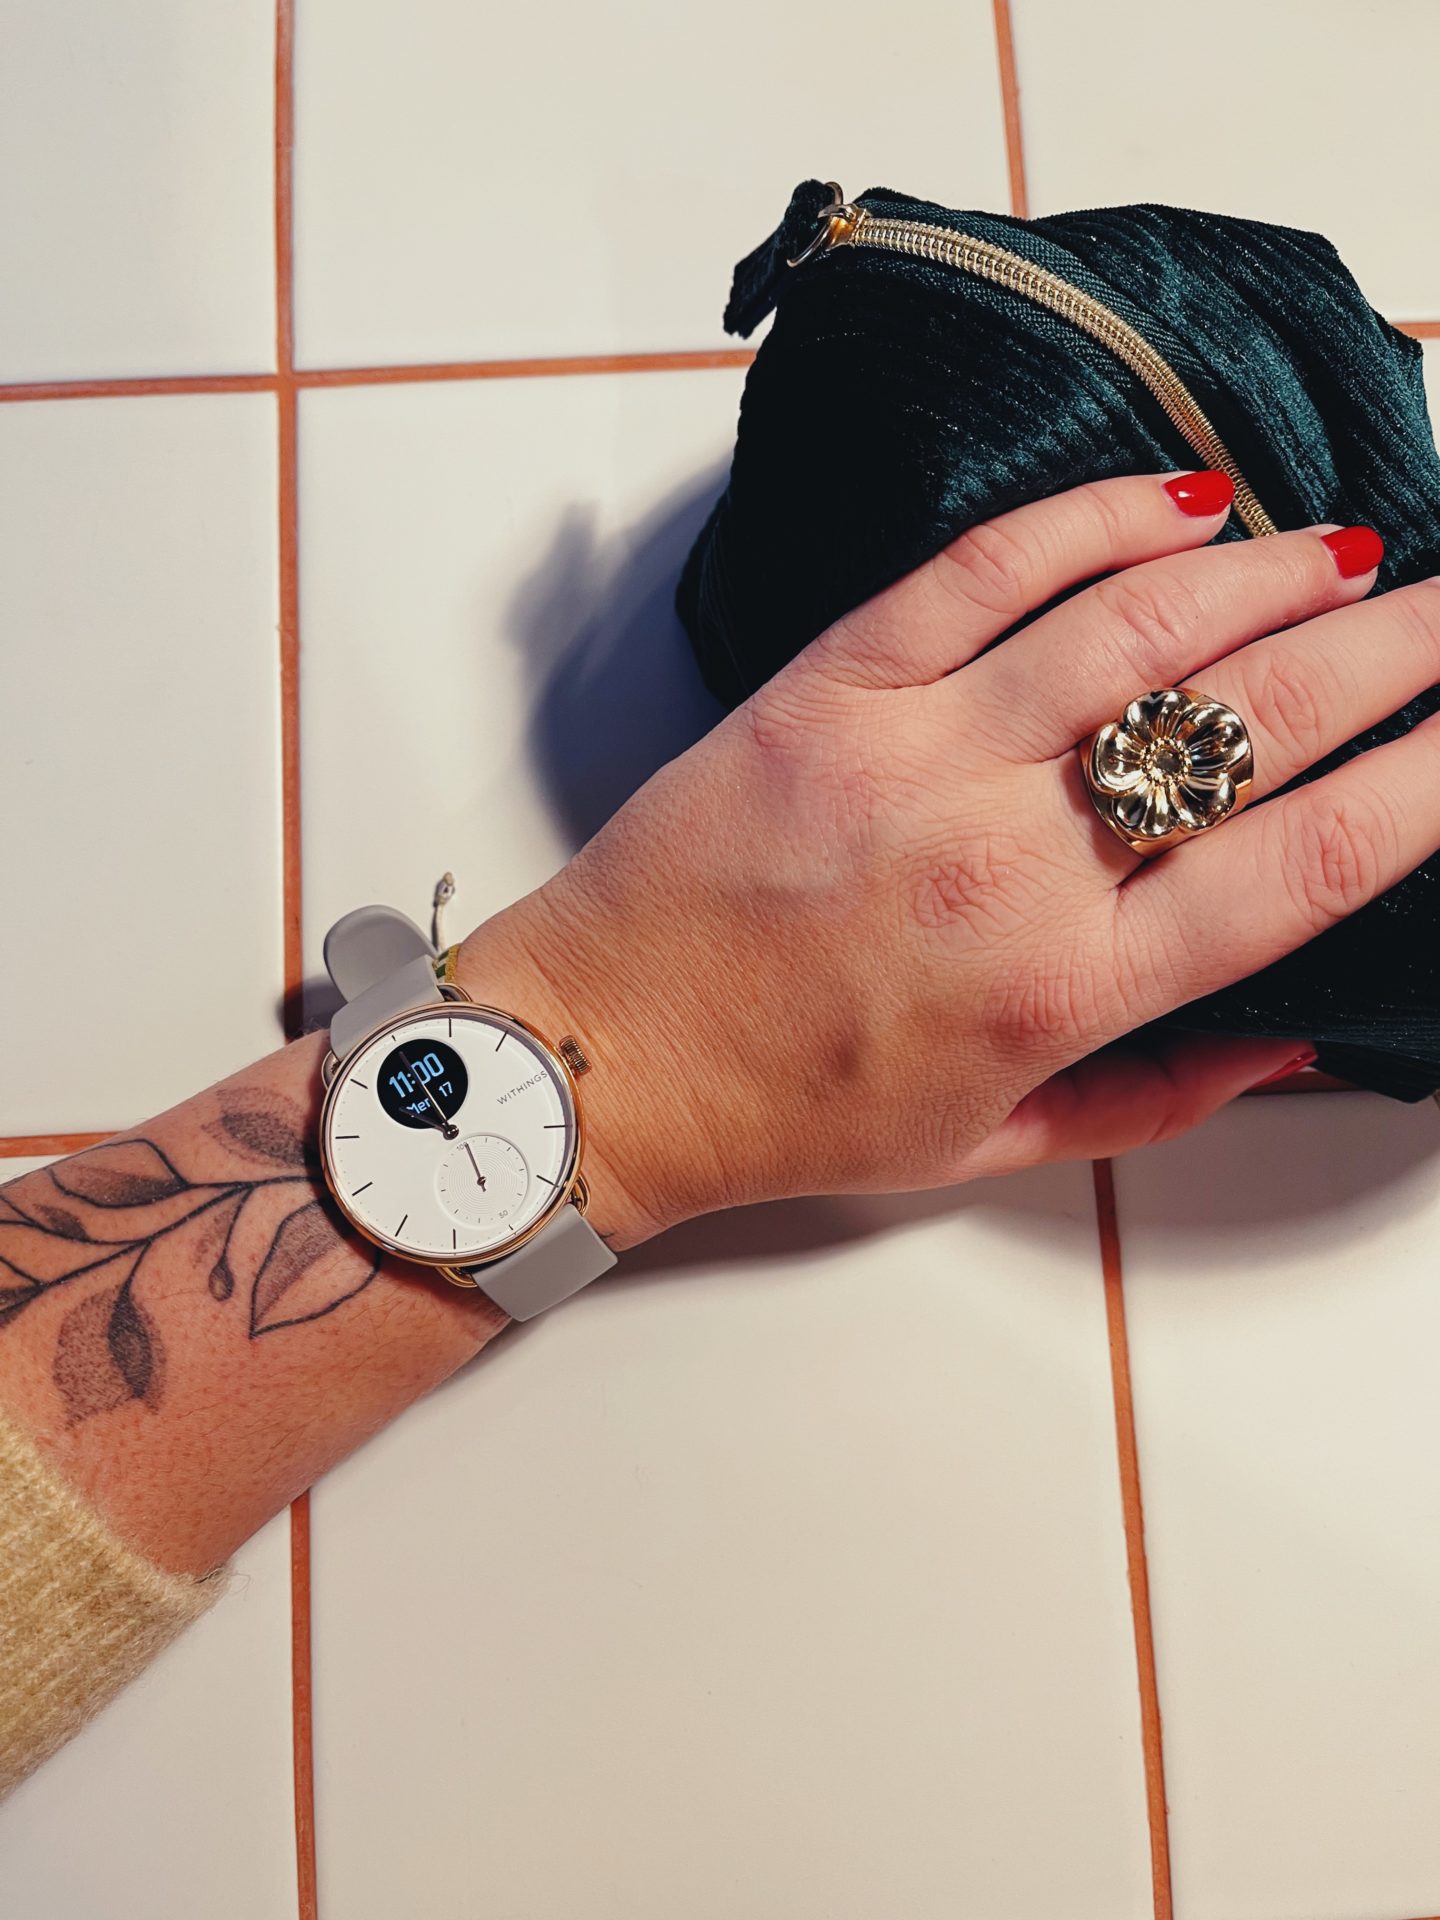 Test : La Montre WITHINGS Scanwatch - Le So Girly Blog